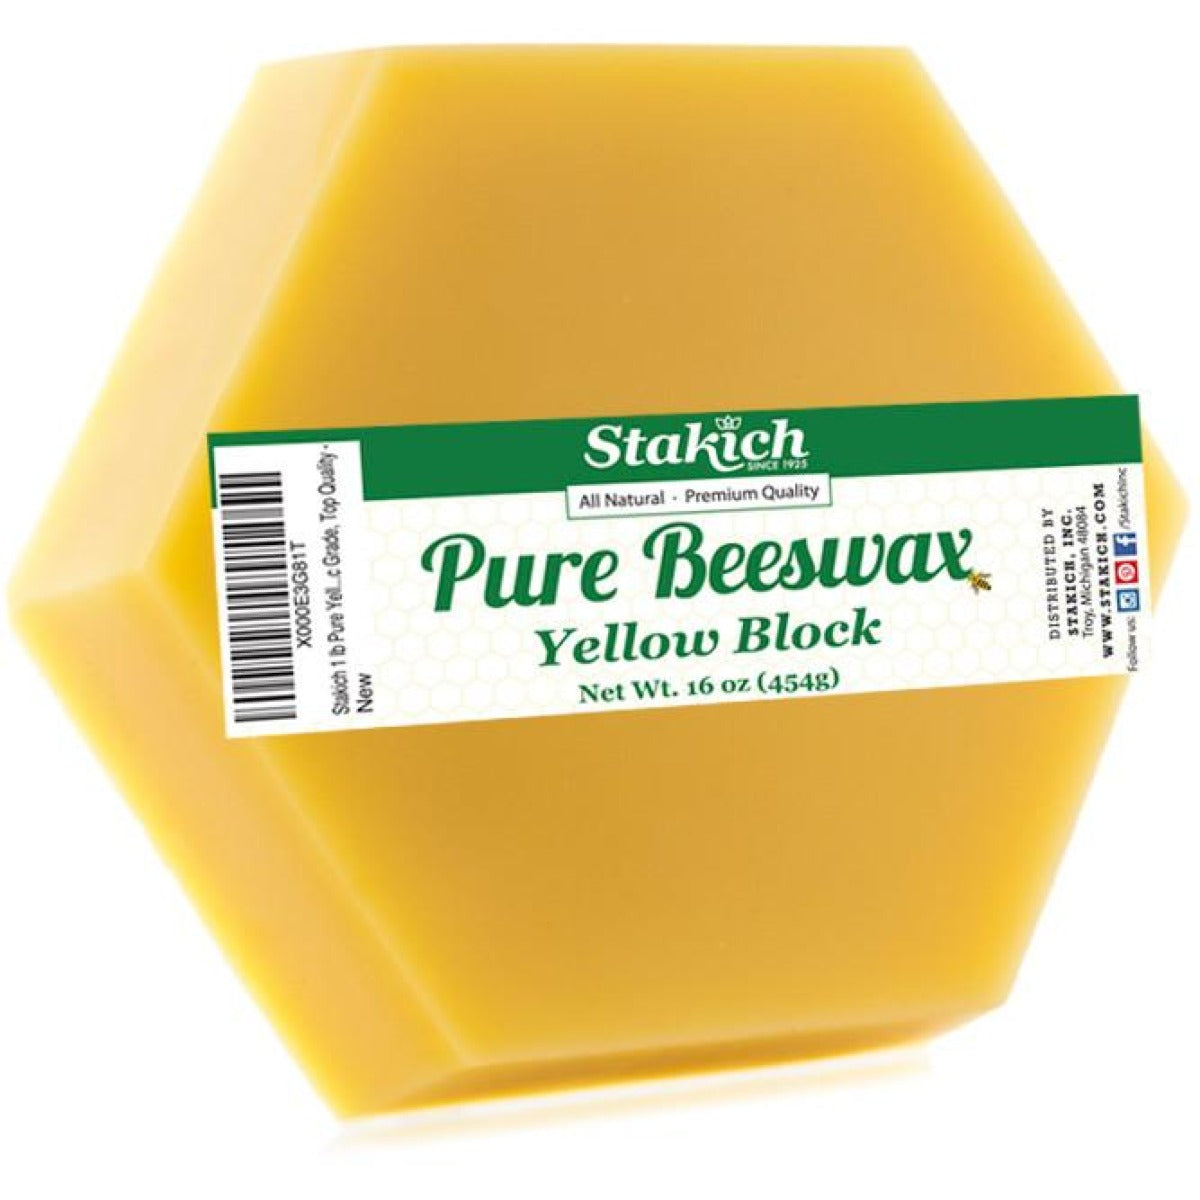 Stakich Pure Beeswax Block, Yellow - 1 lb (454 g) 